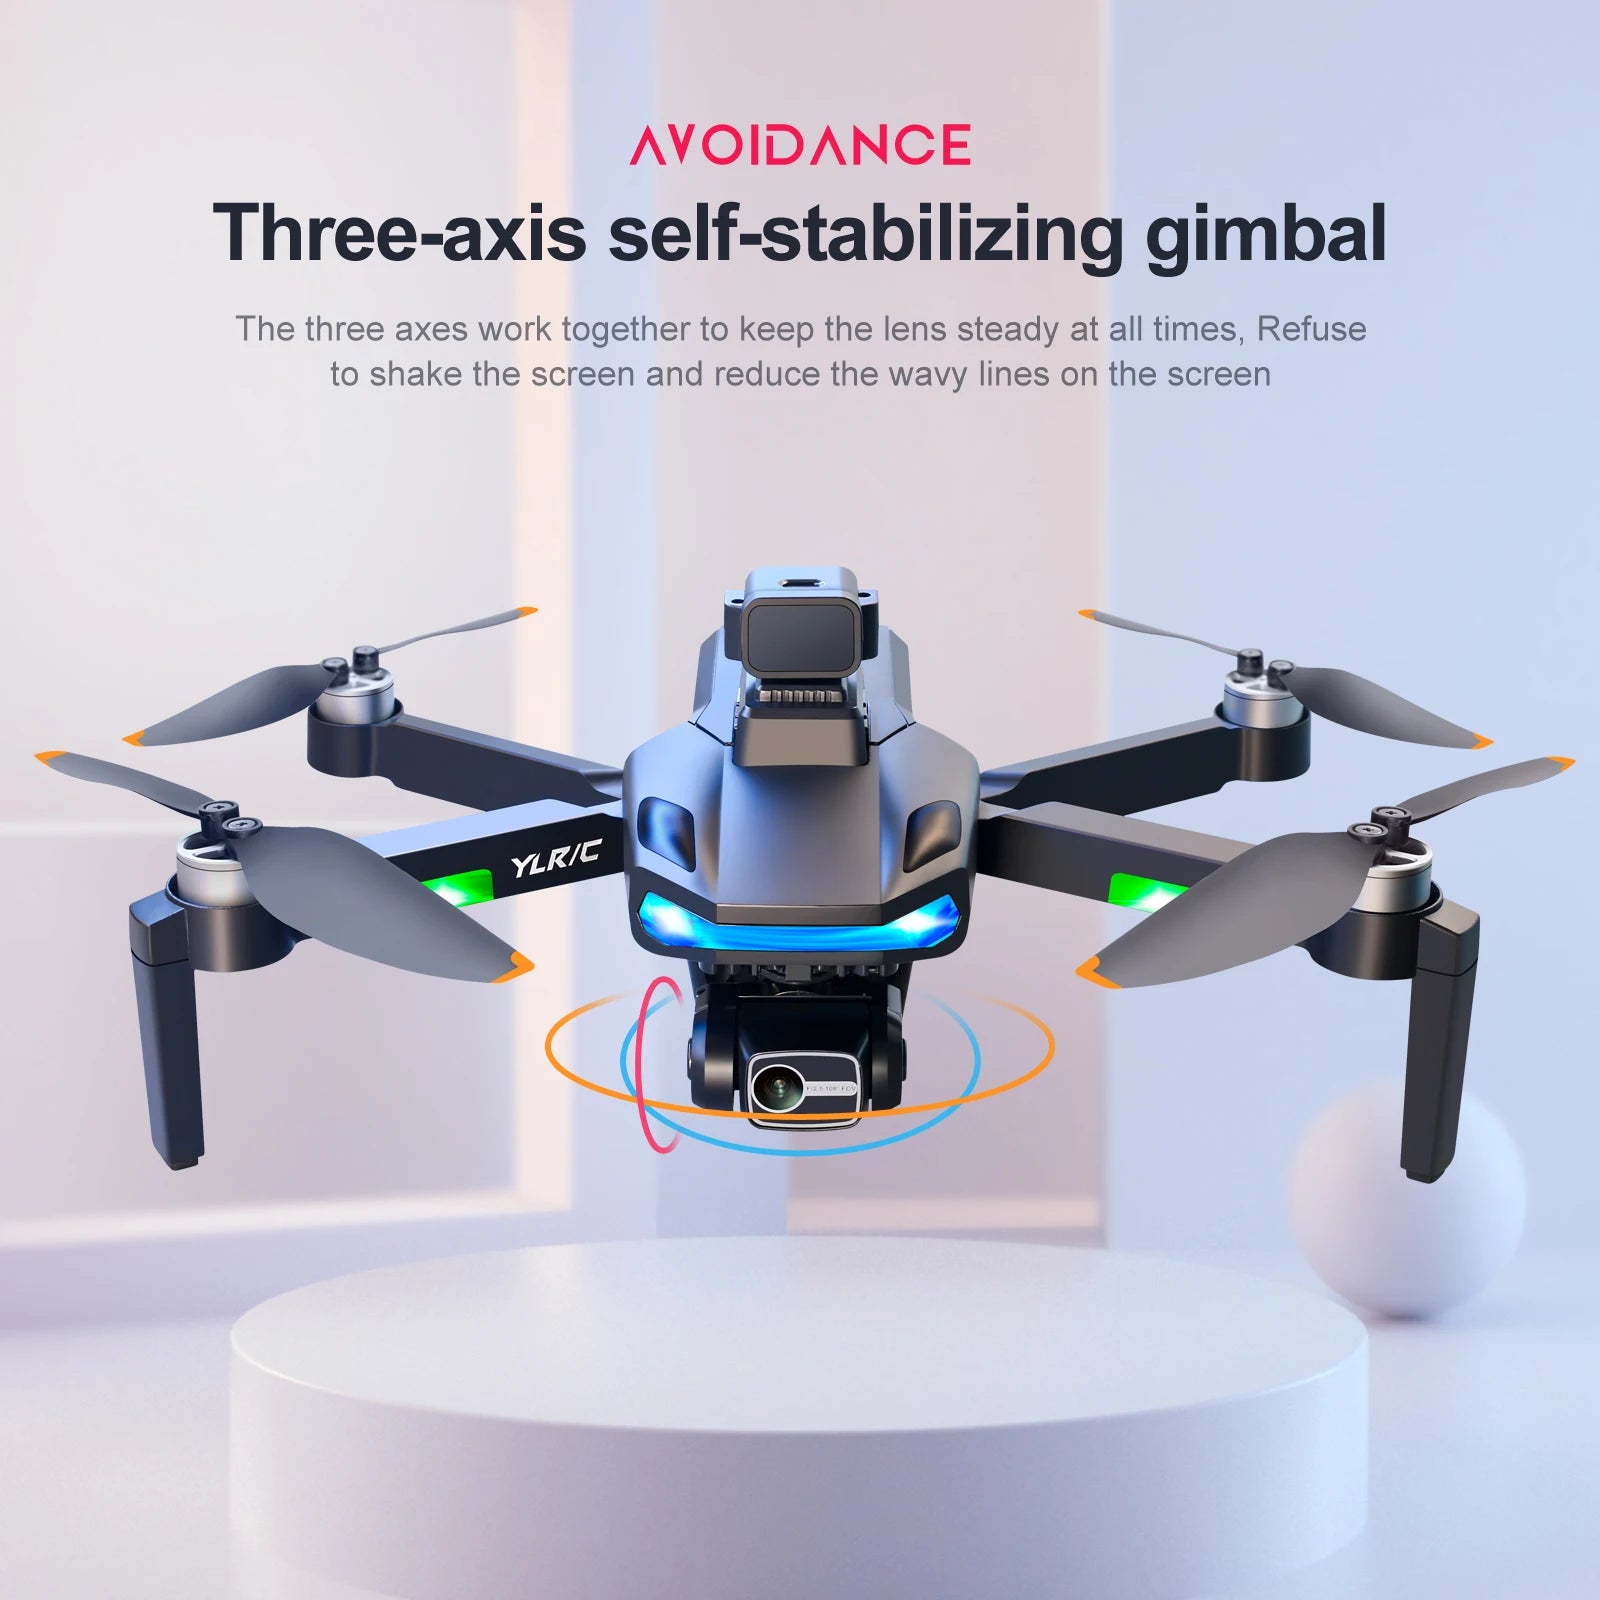 S135 Drone, three-axis self-stabilizing gimbal keeps lens steady at all times 